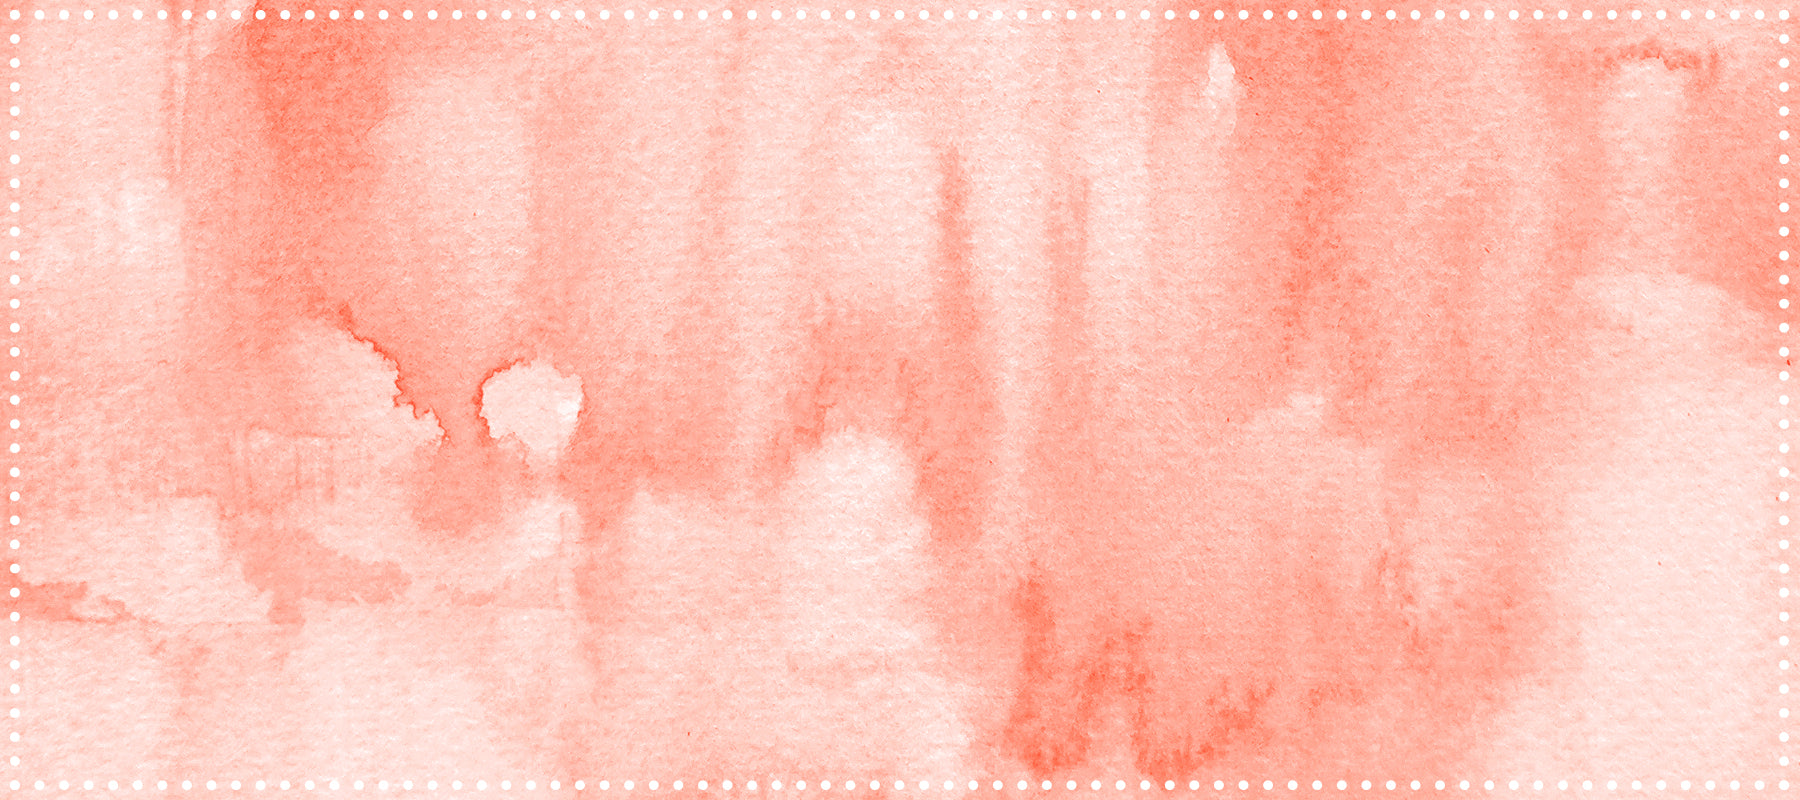 Abstract red watercolor background with soft washes and a textured, dotted border.